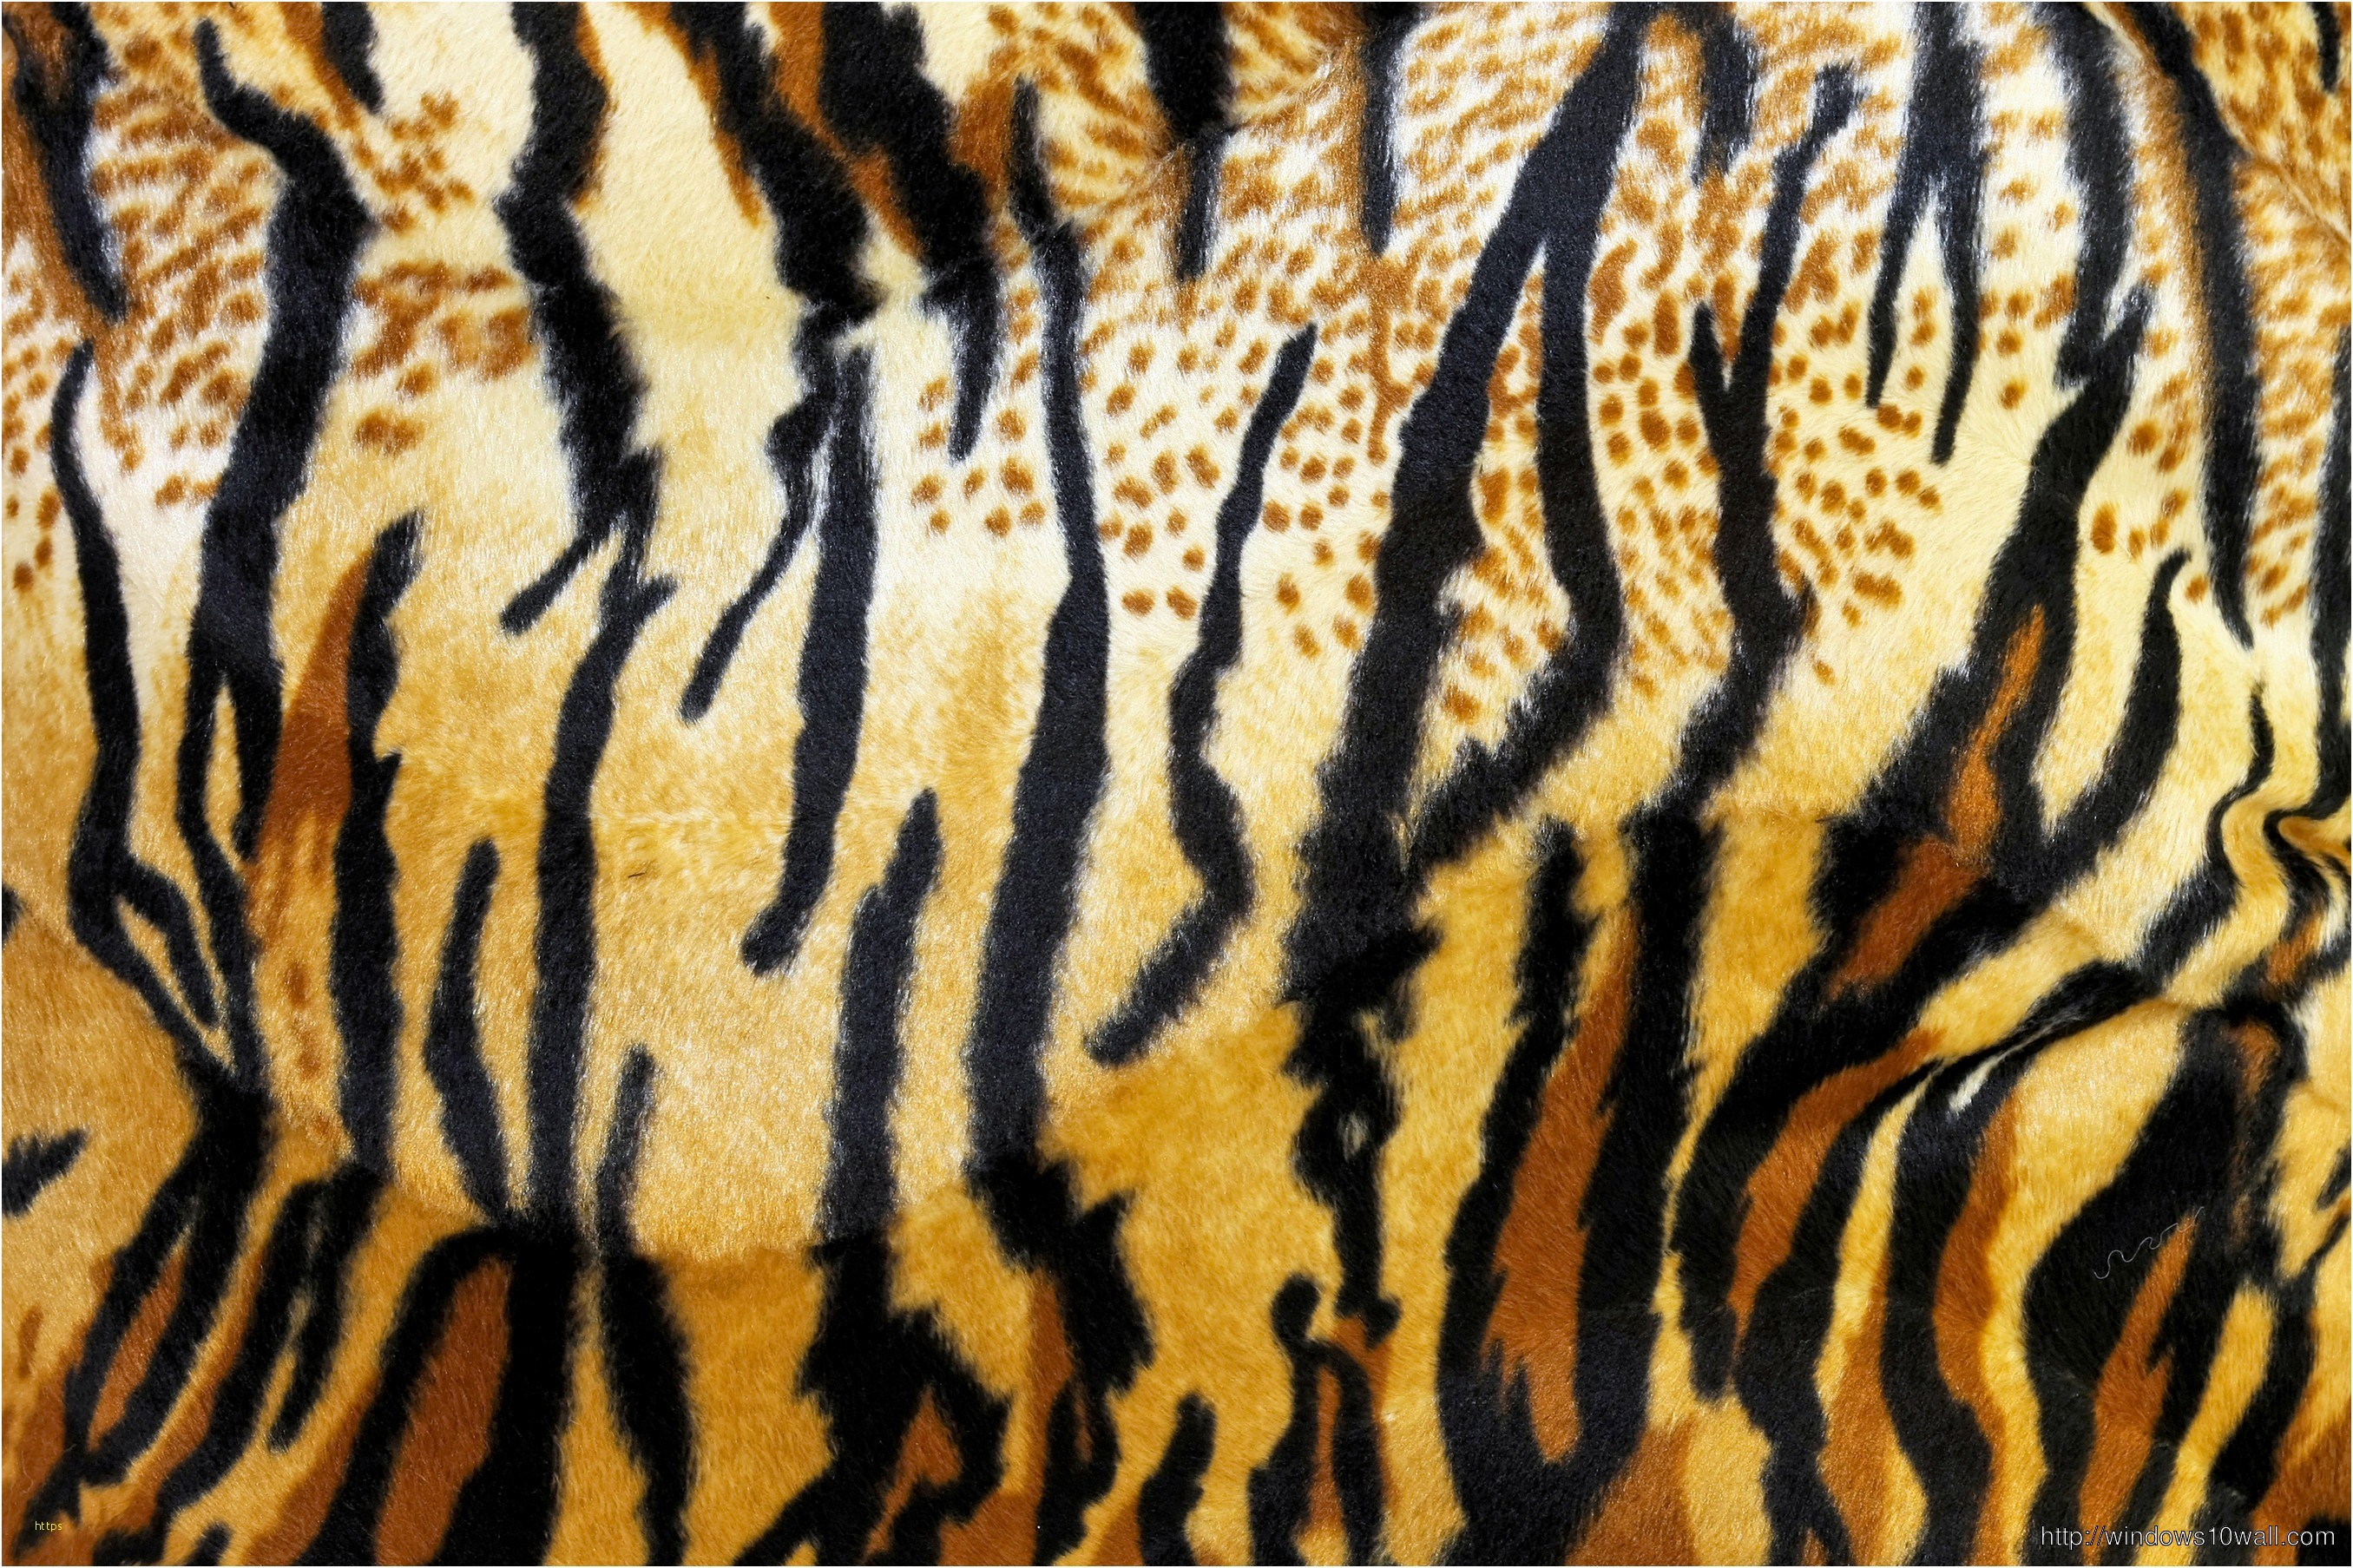 Animal Print Wallpaper Best Of Animal Page 2 Windows 10 Wallpapers 2711x1807